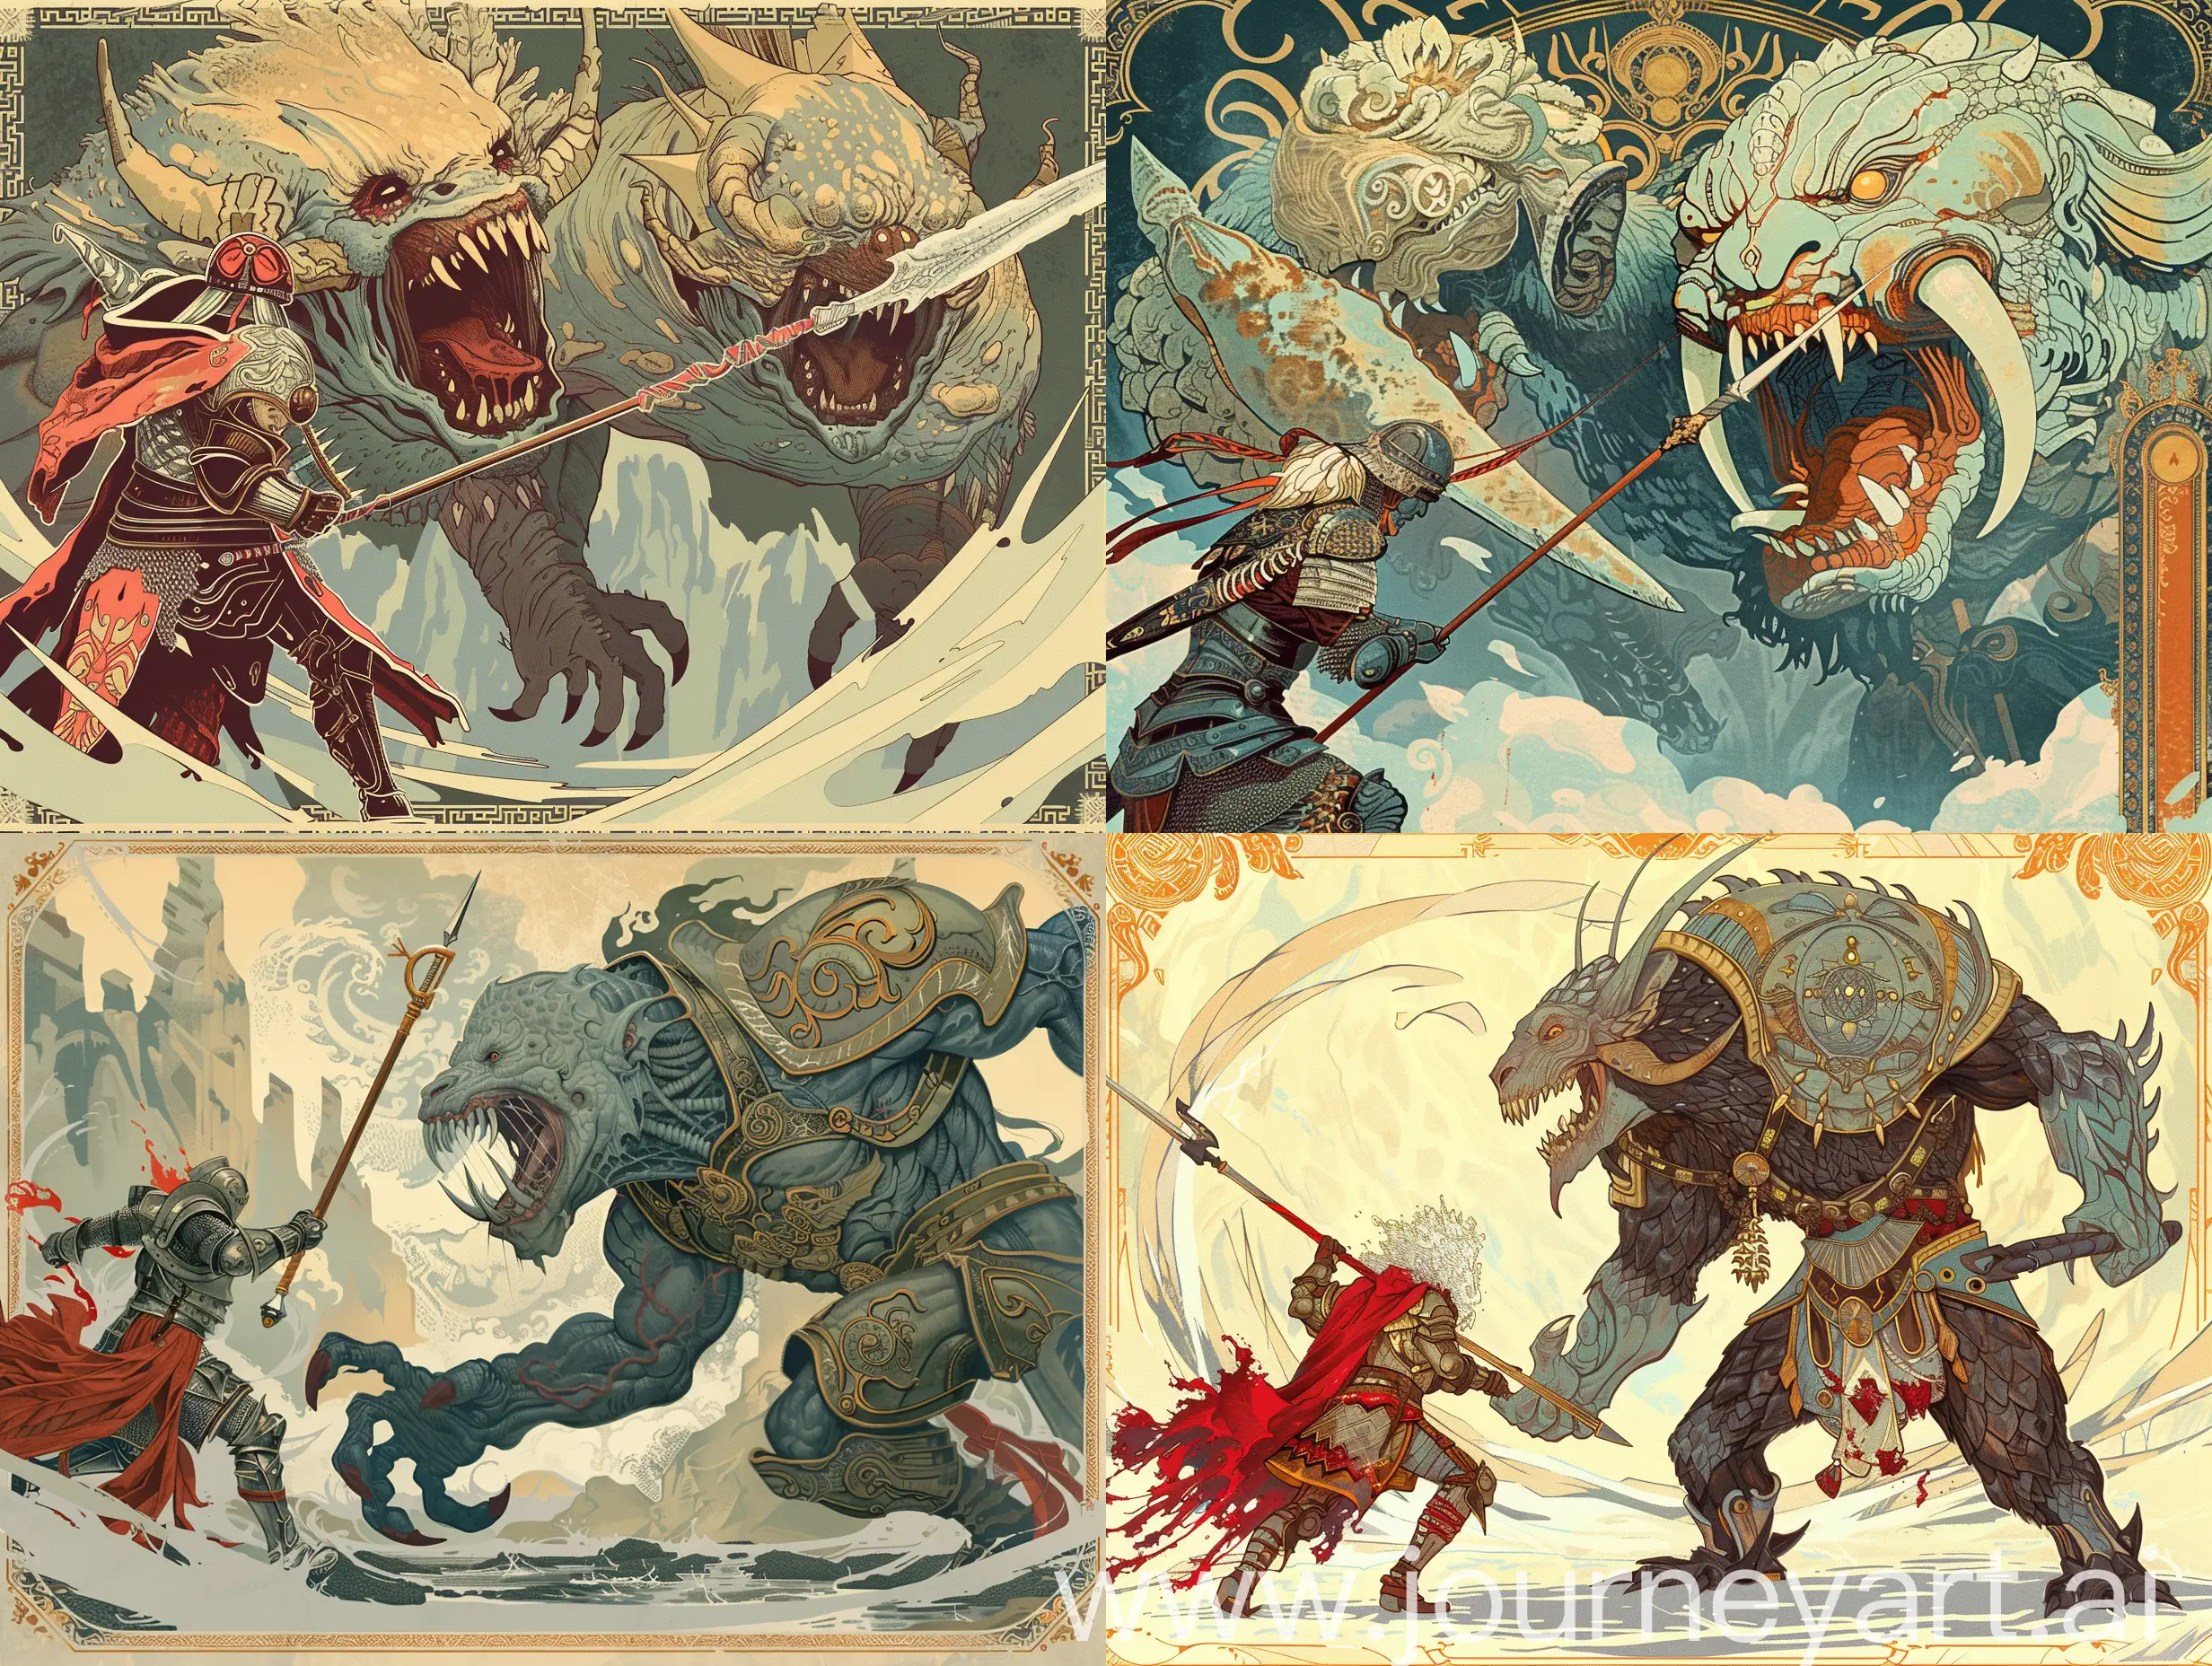 Epic-Warrior-Confrontation-Brave-Knight-Battles-Monstrous-TwoHeaded-Beast